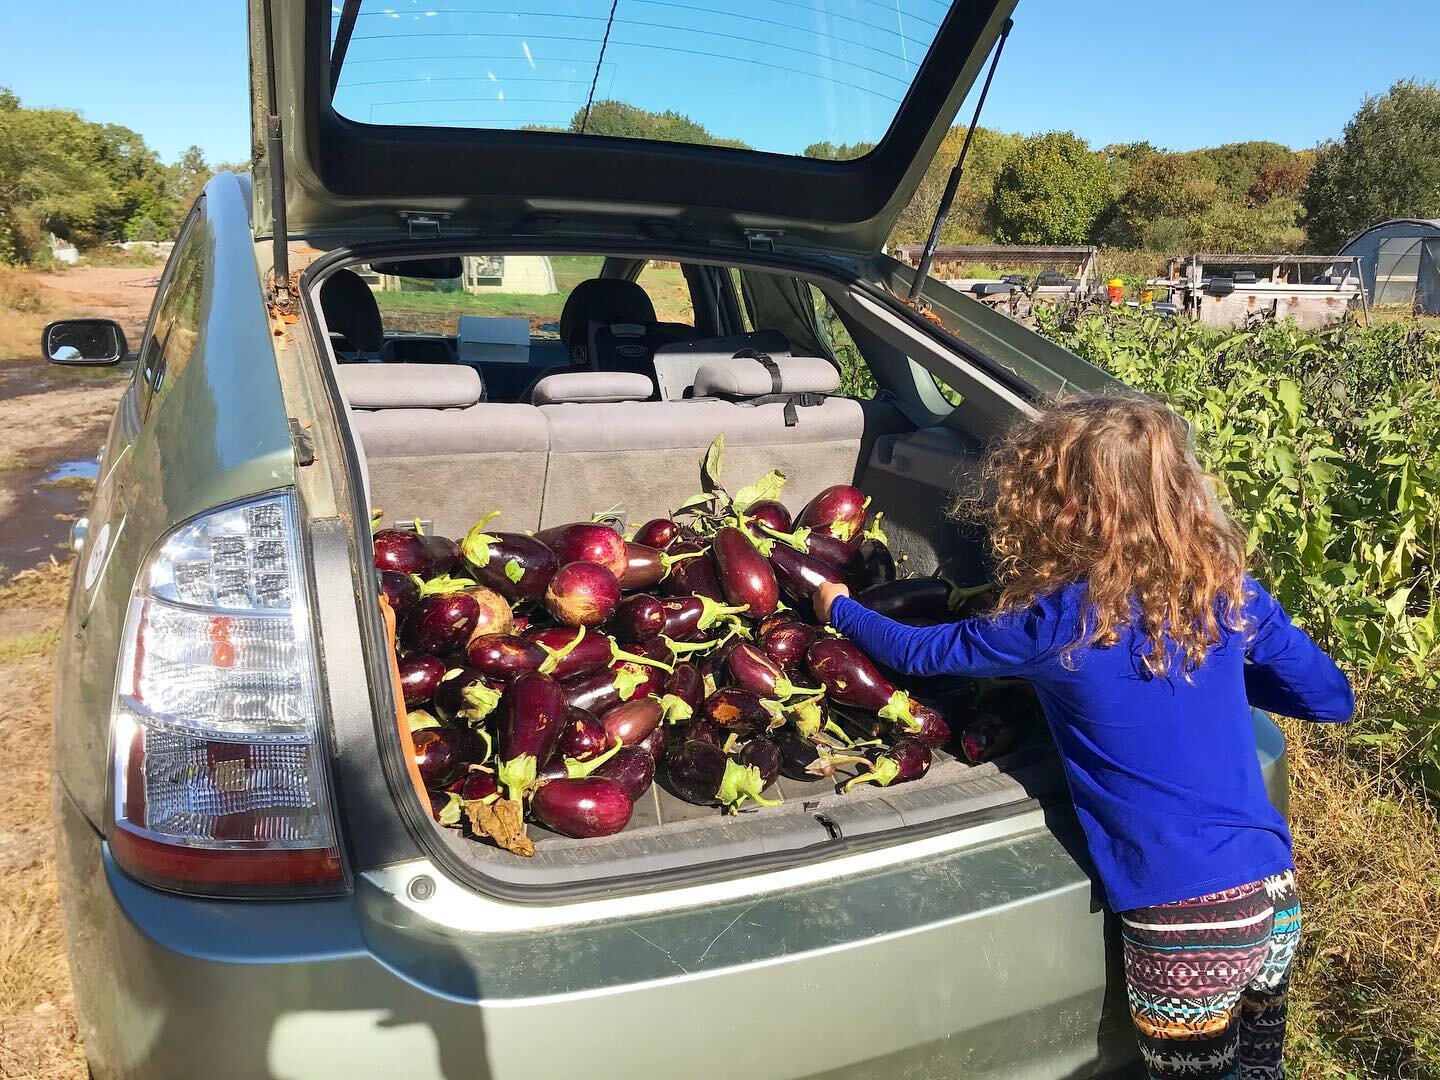 Looking for fall fun? Come join us for gleaning tomorrow from 9-10 at Pariah Dog Farm! 

The Falmouth Service Center is now accepting all food donations from 8-12 on Wednesdays. Head to the back of the service center for drop off. 

Gleaning dates fo